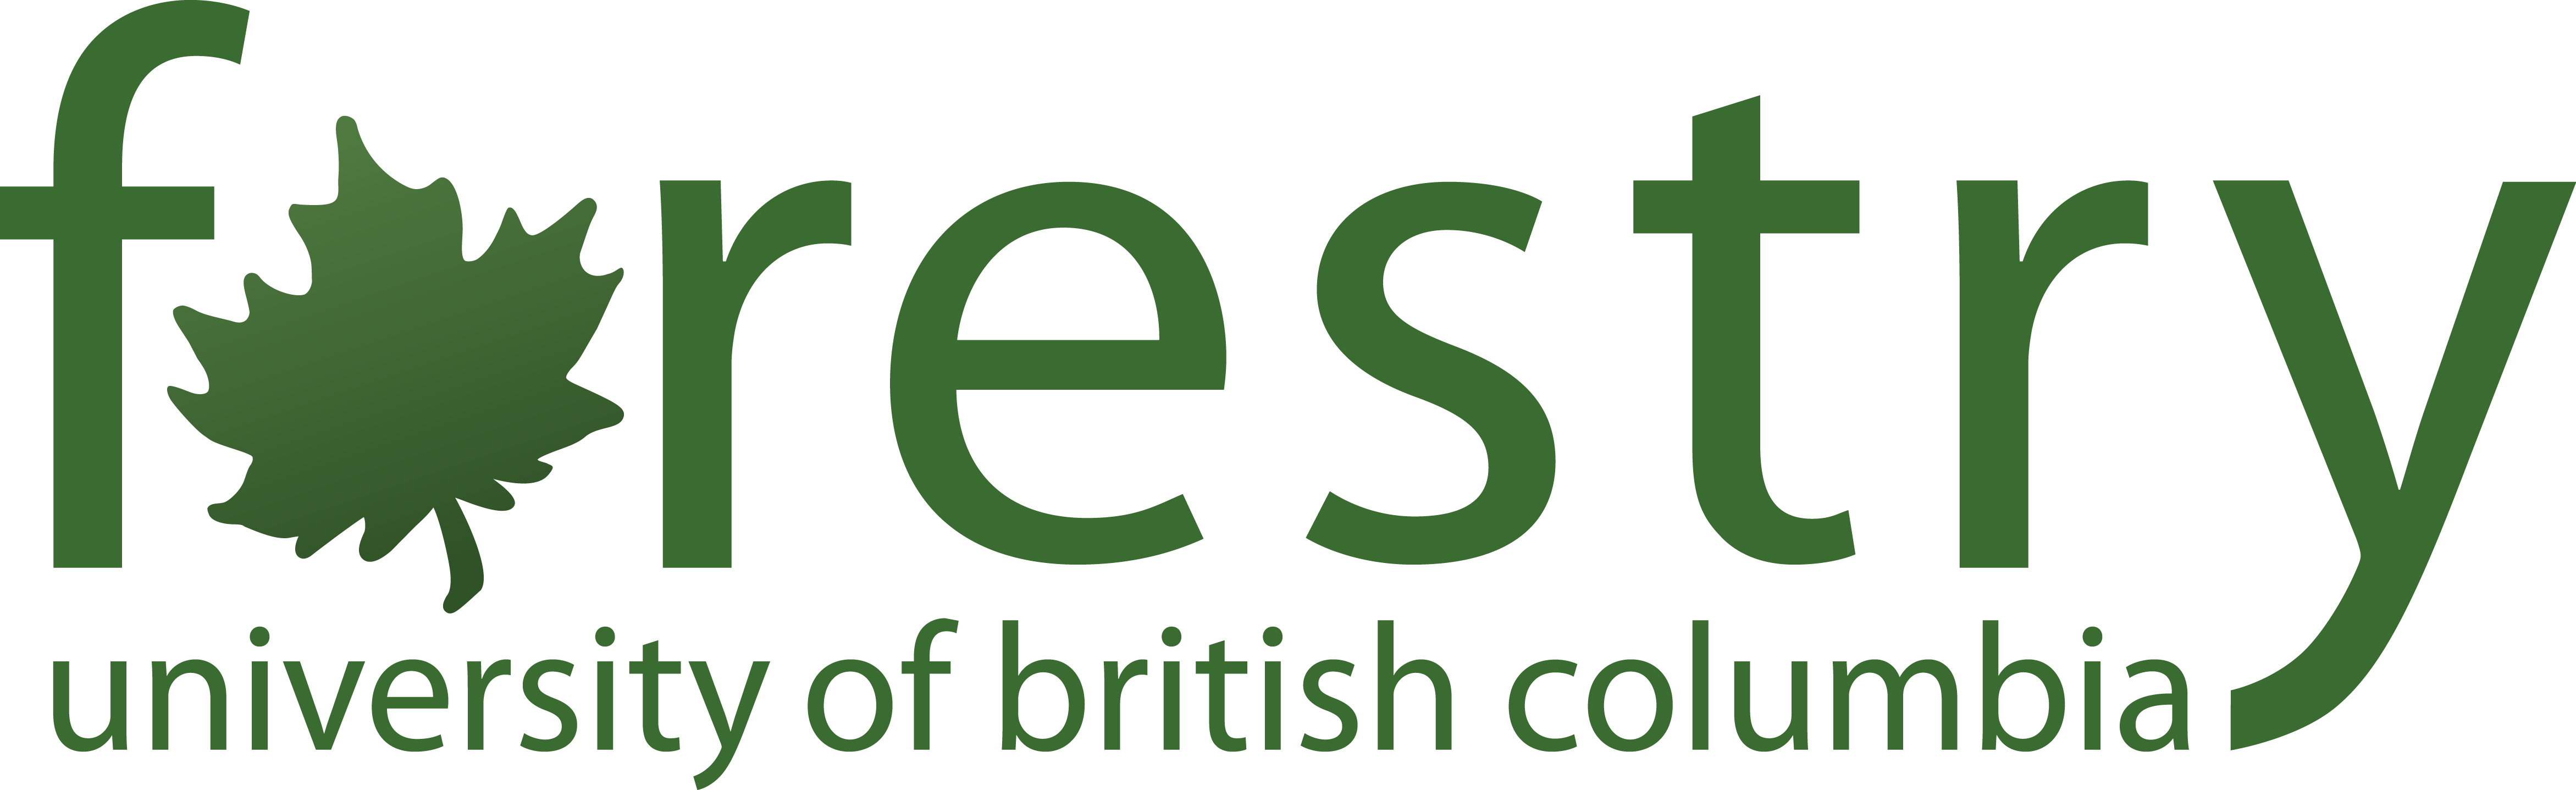 University of British Columbia Forestry Logo in forest green, with the O as a maple leaf shape